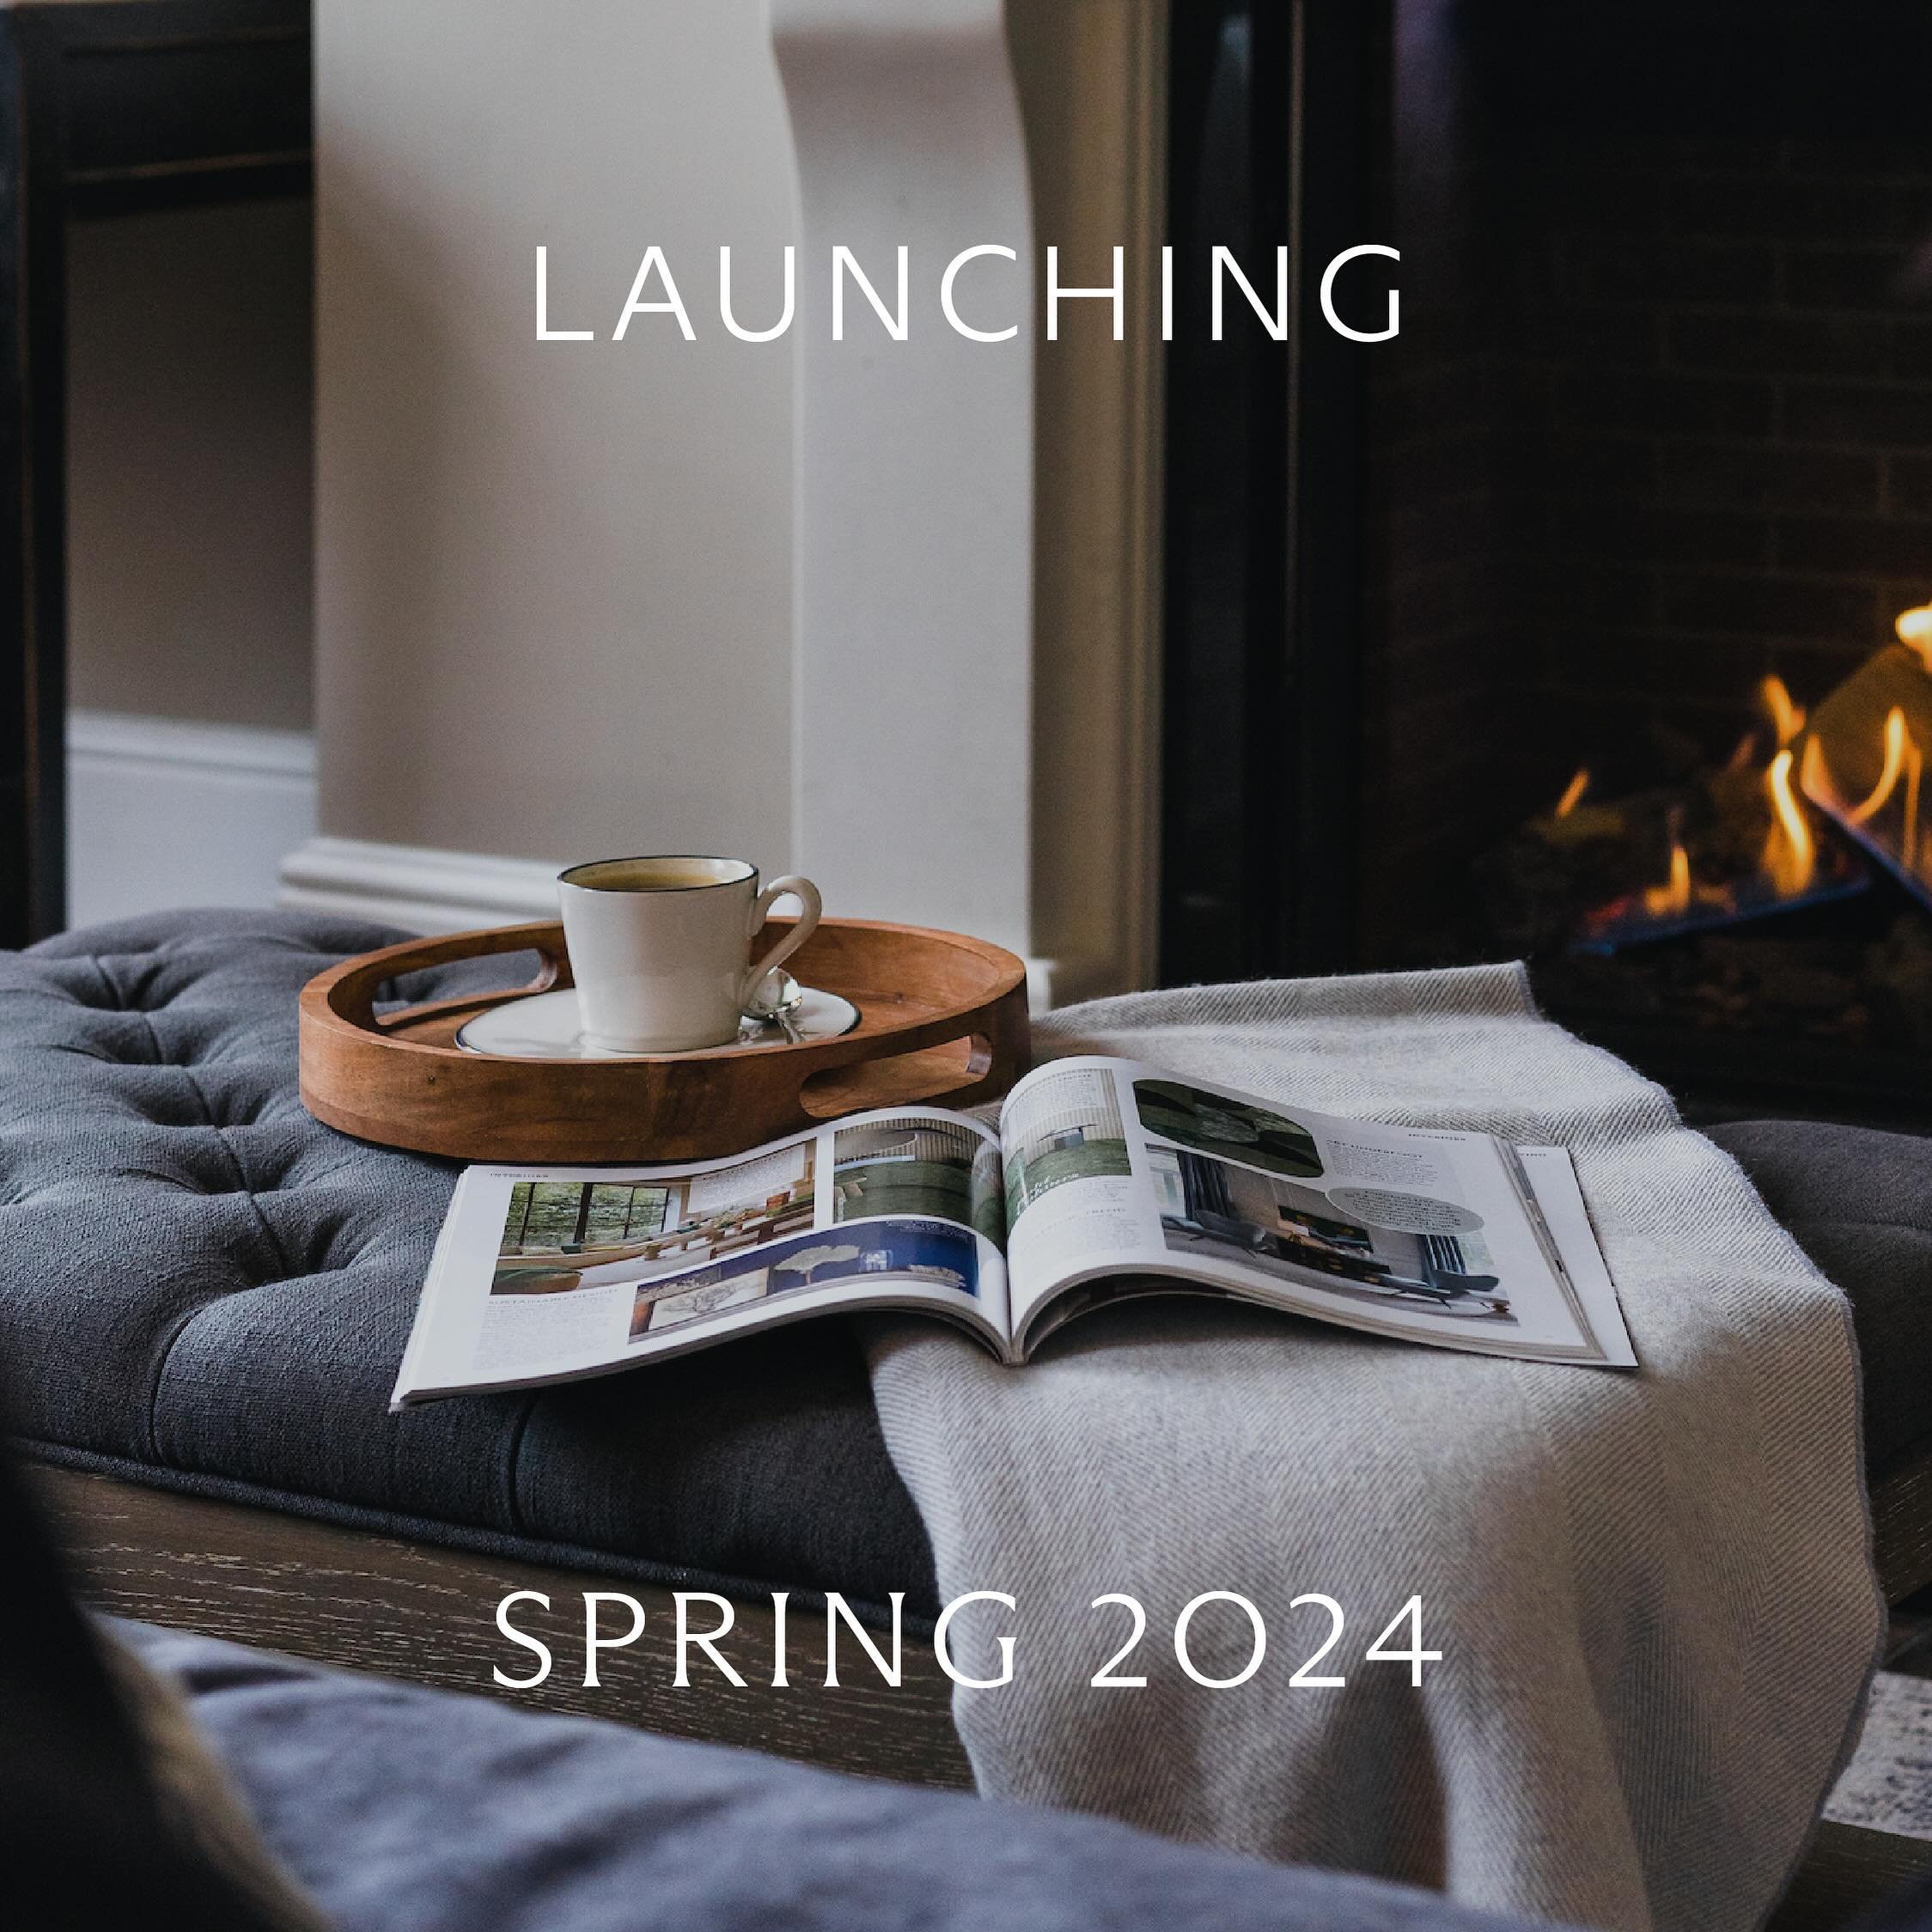 As the Crescent&rsquo;s new custodians, we&rsquo;re proud to open the door to a new generation of guest. We hope you enjoy its charm as much as we do. 

Launching Spring 2024.

#BelfastHospitalityHouse #LaunchingSpring2024